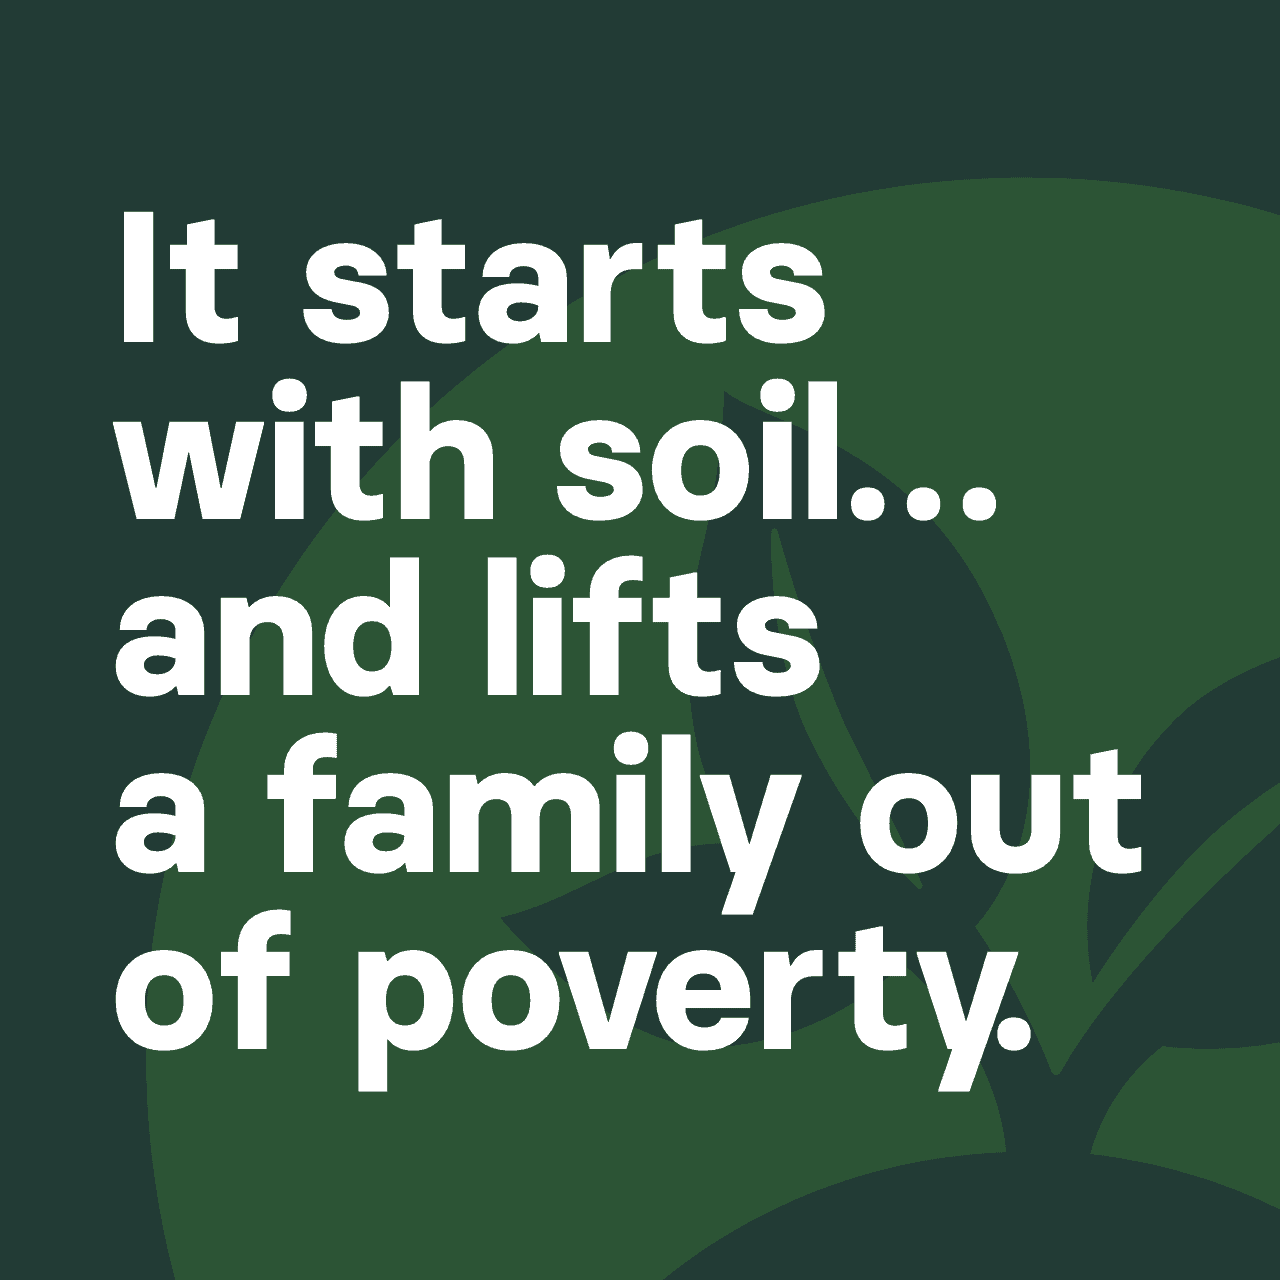 quote - it starts with soil...and lifts a family out of poverty